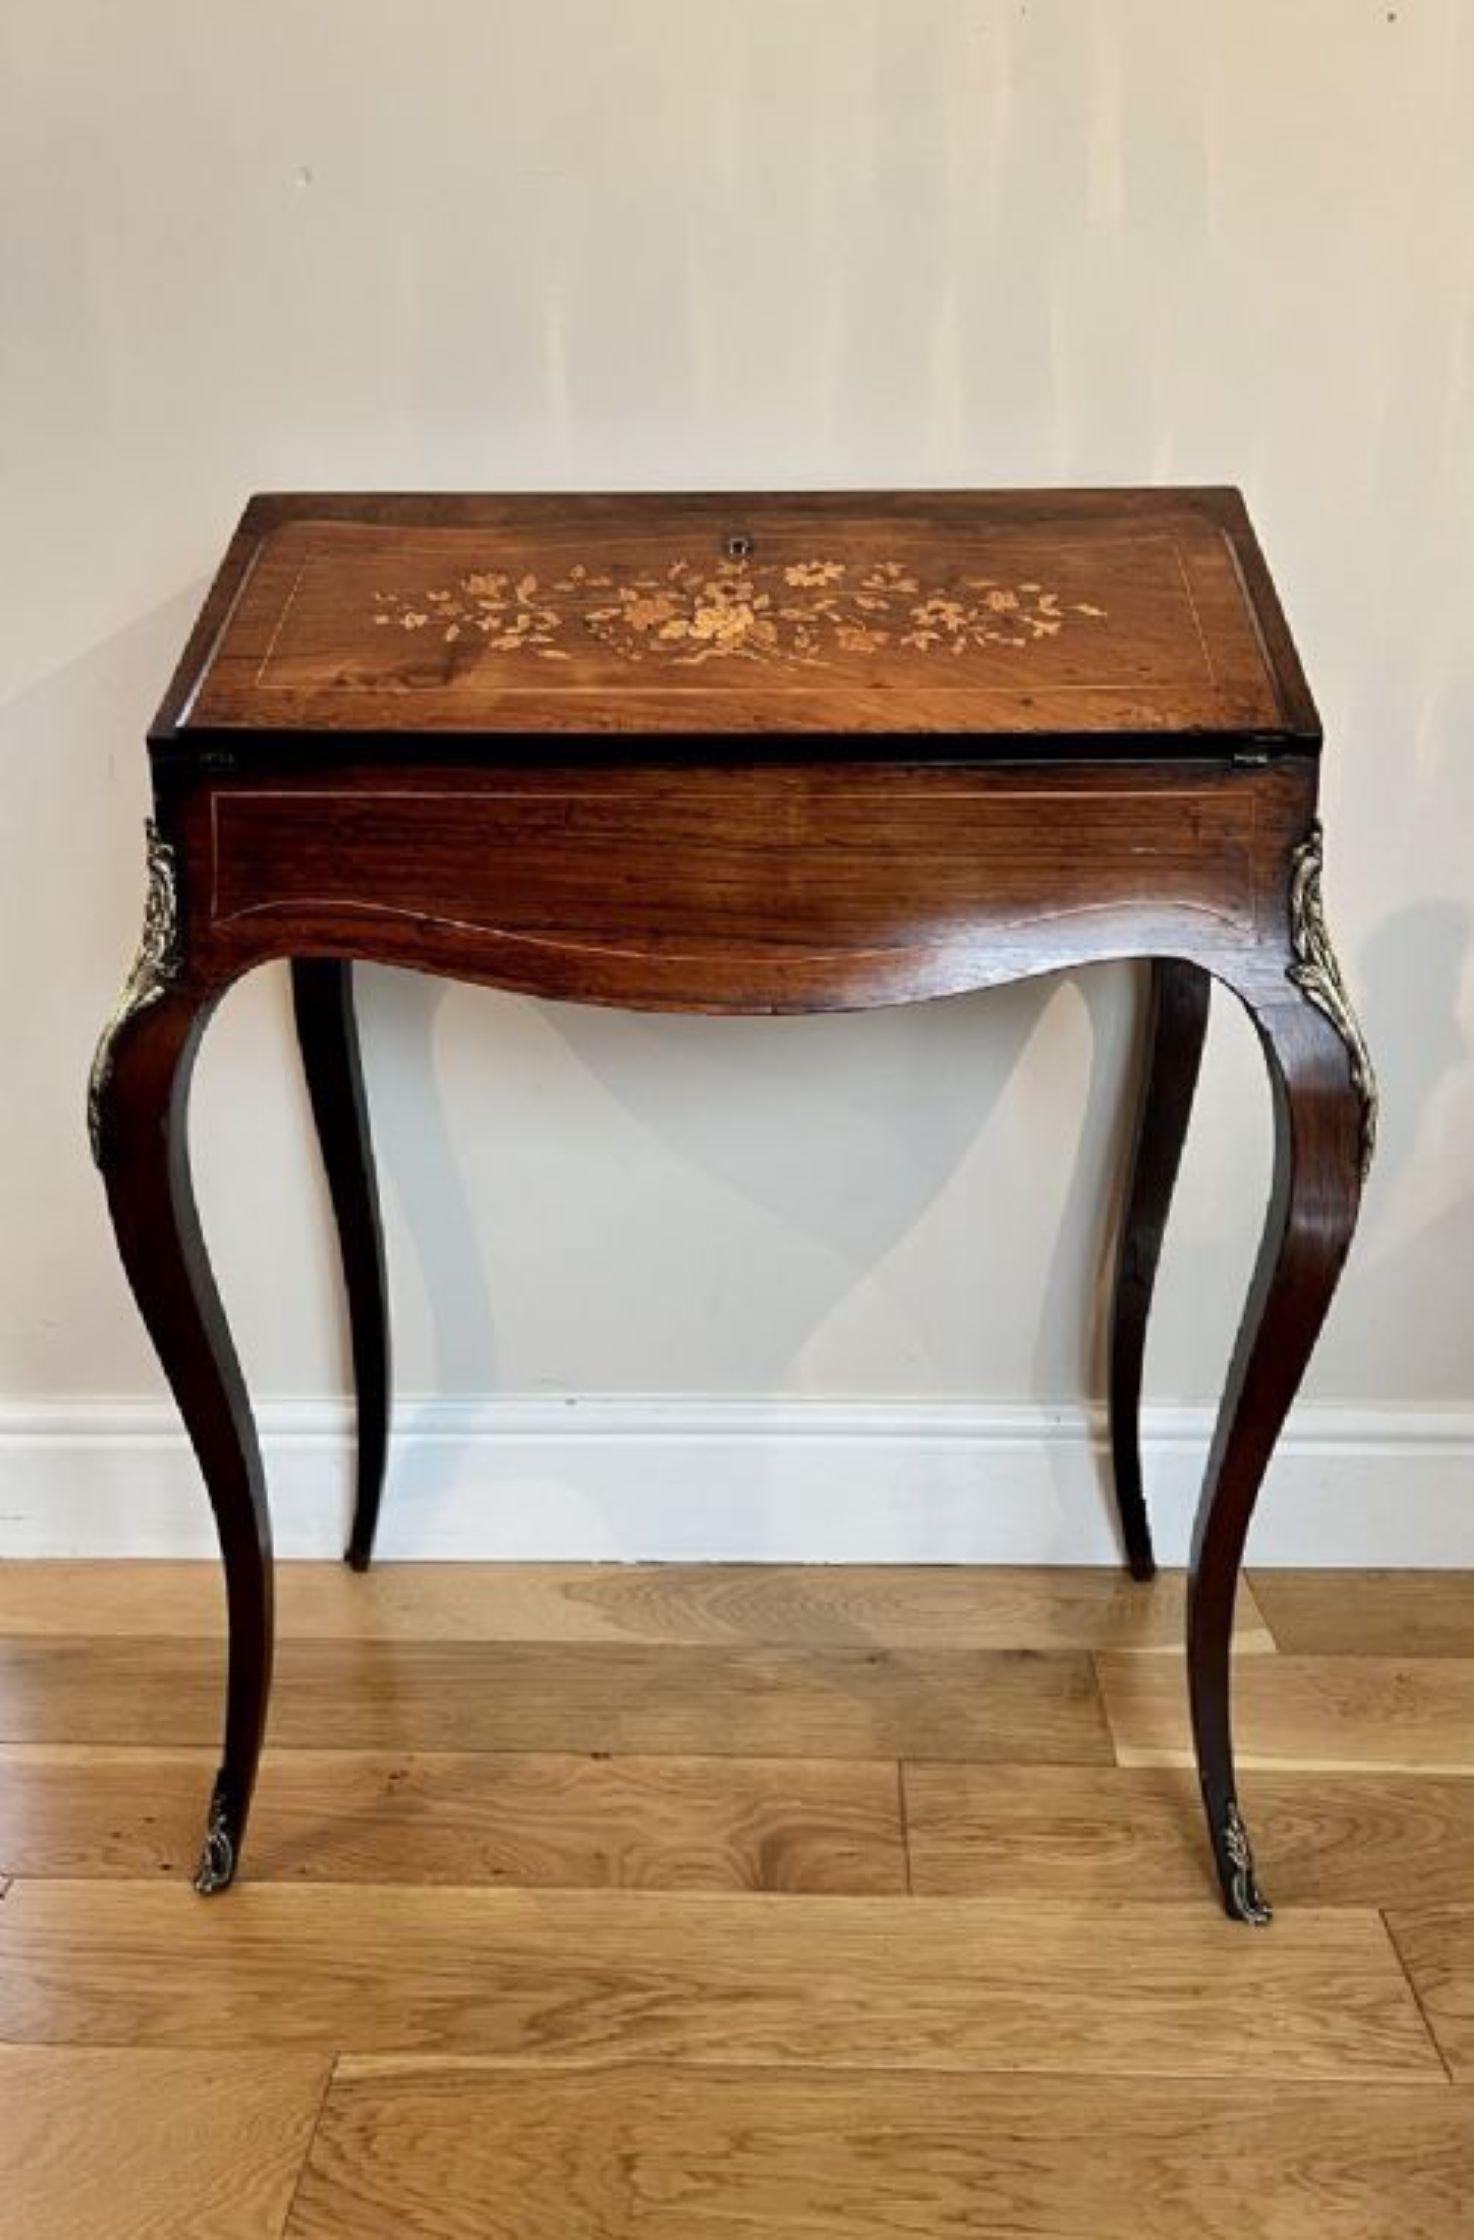 Antique Victorian French rosewood marquetry inlaid bureau having a quality antique Victorian French rosewood marquetry inlaid bureau opening to reveal fitted interior consisting of a leather pull out, two drawers and one large drawer compartment to